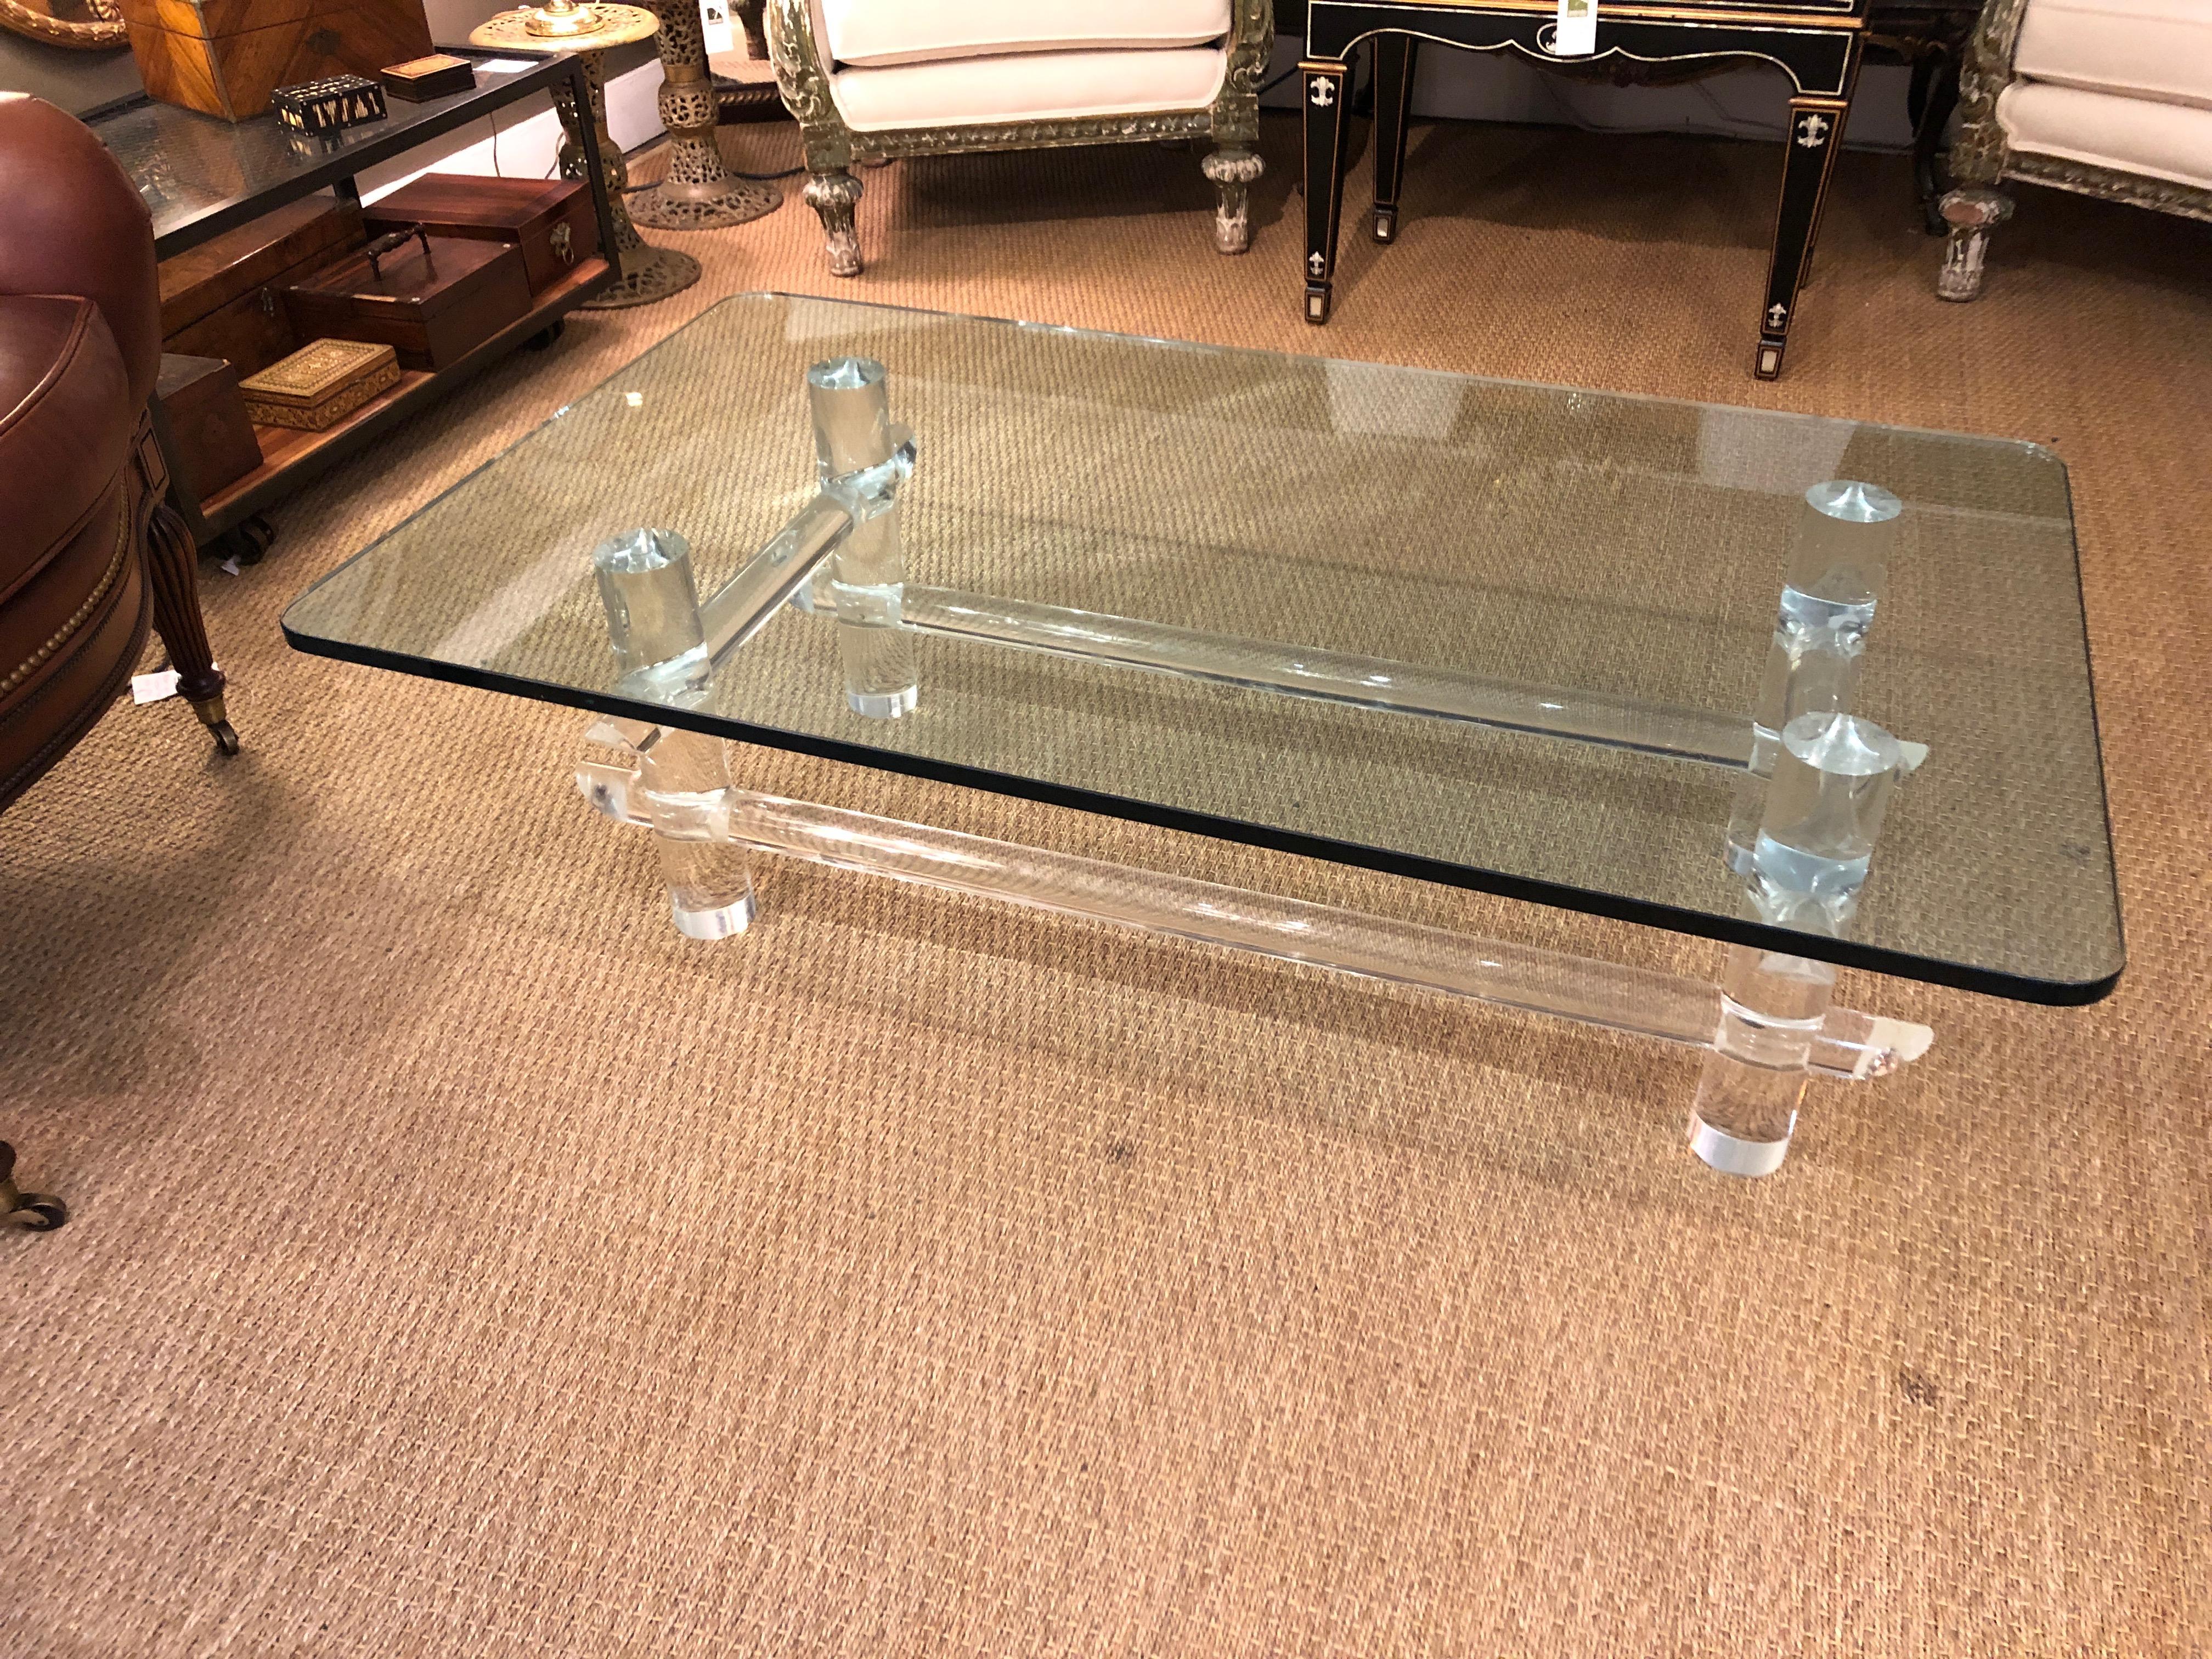 American Rock Star of a Lucite and Glass Coffee Table in the Style of Parzinger